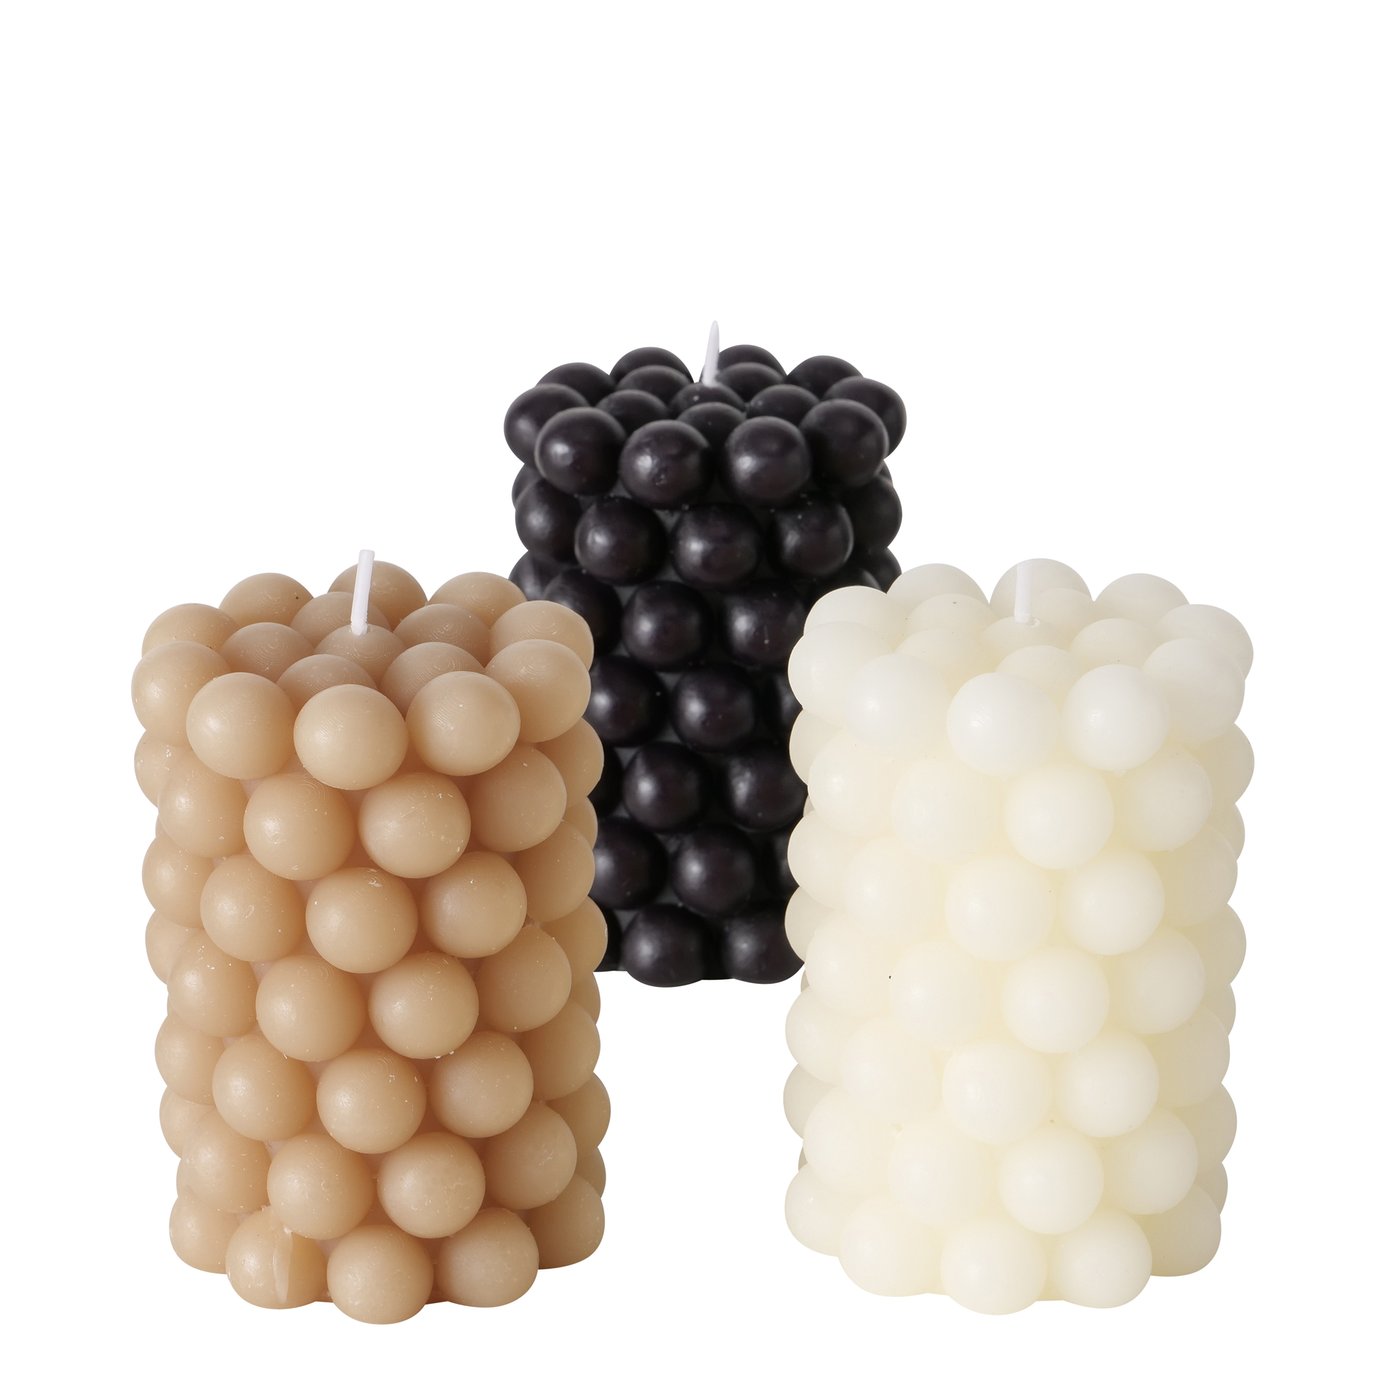 &Quirky Colour Pop Pearls Bubble Candle : Black, Cream or Taupe